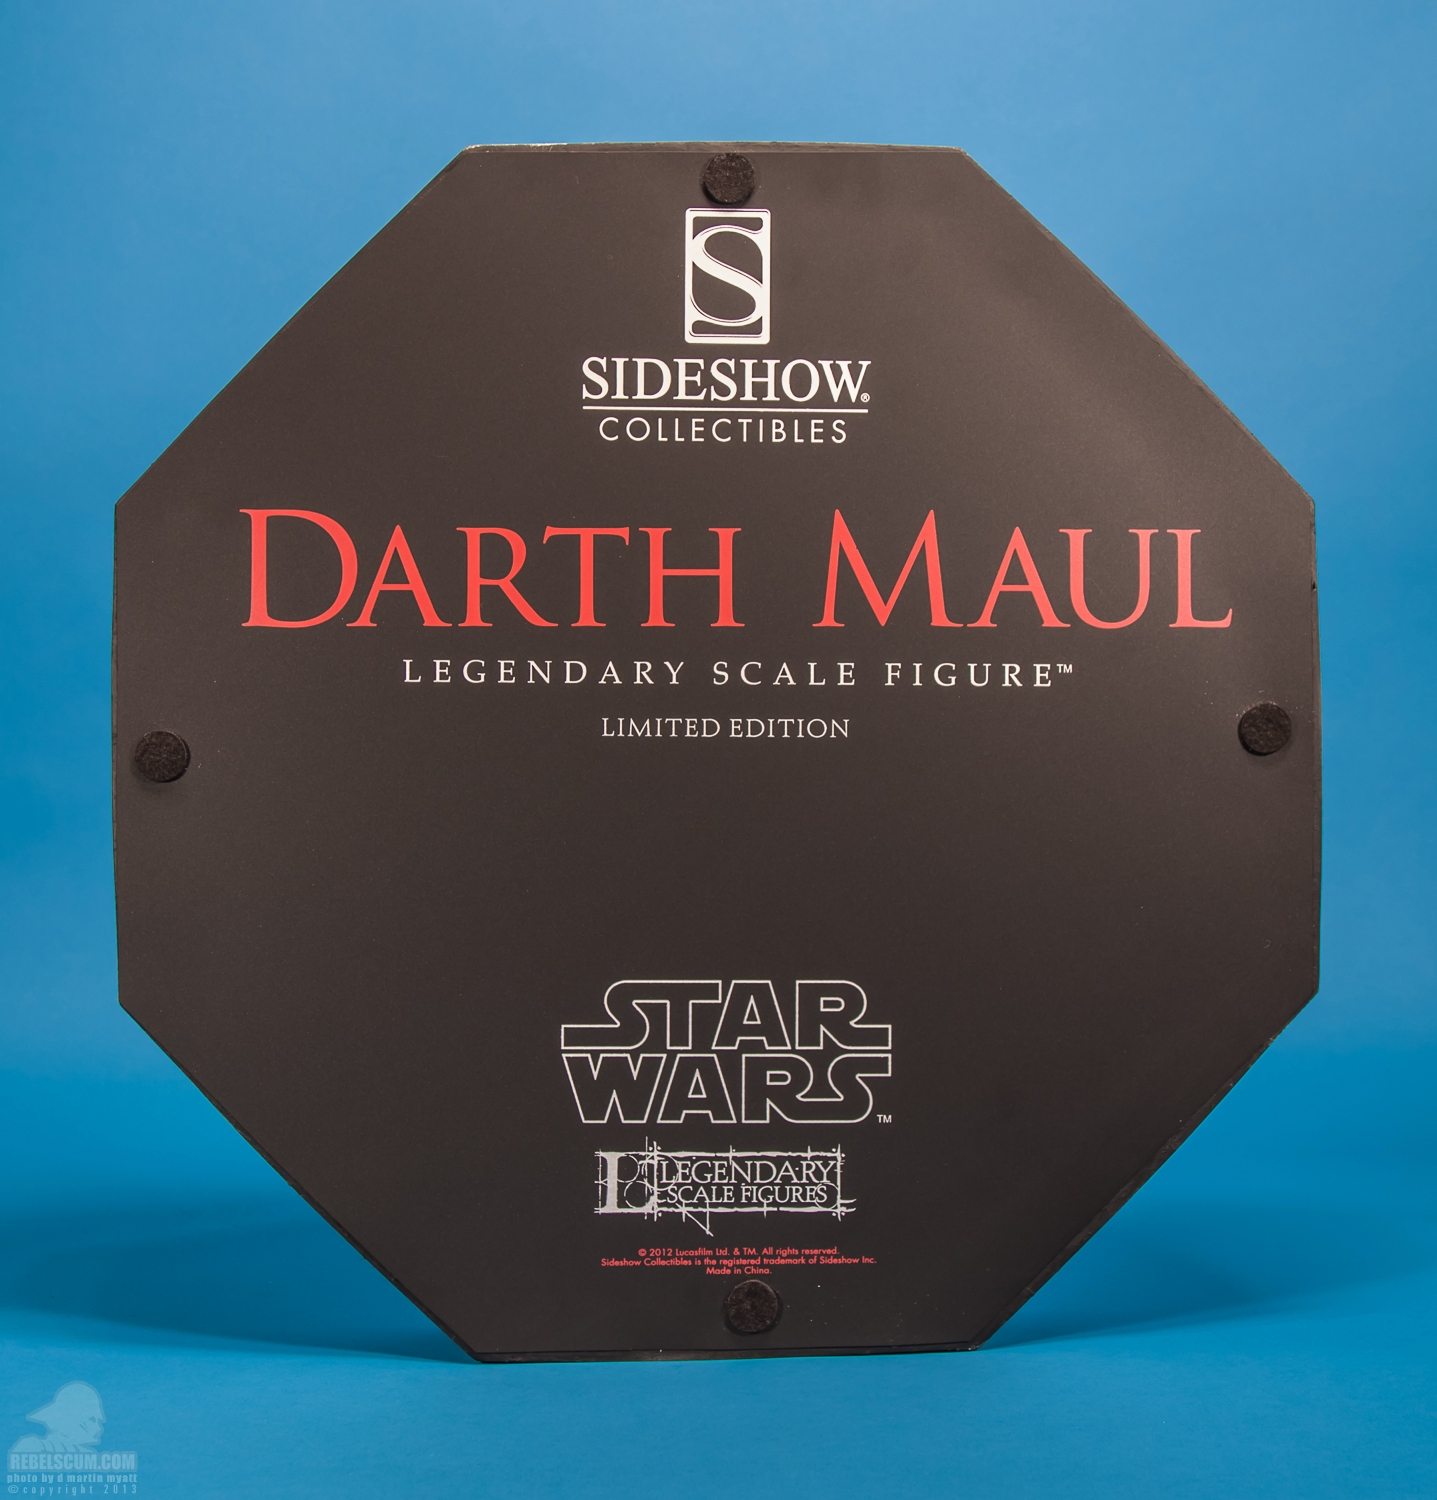 Darth_Maul_Legendary_Scale_Figure_Sideshow_Collectibles-25.jpg